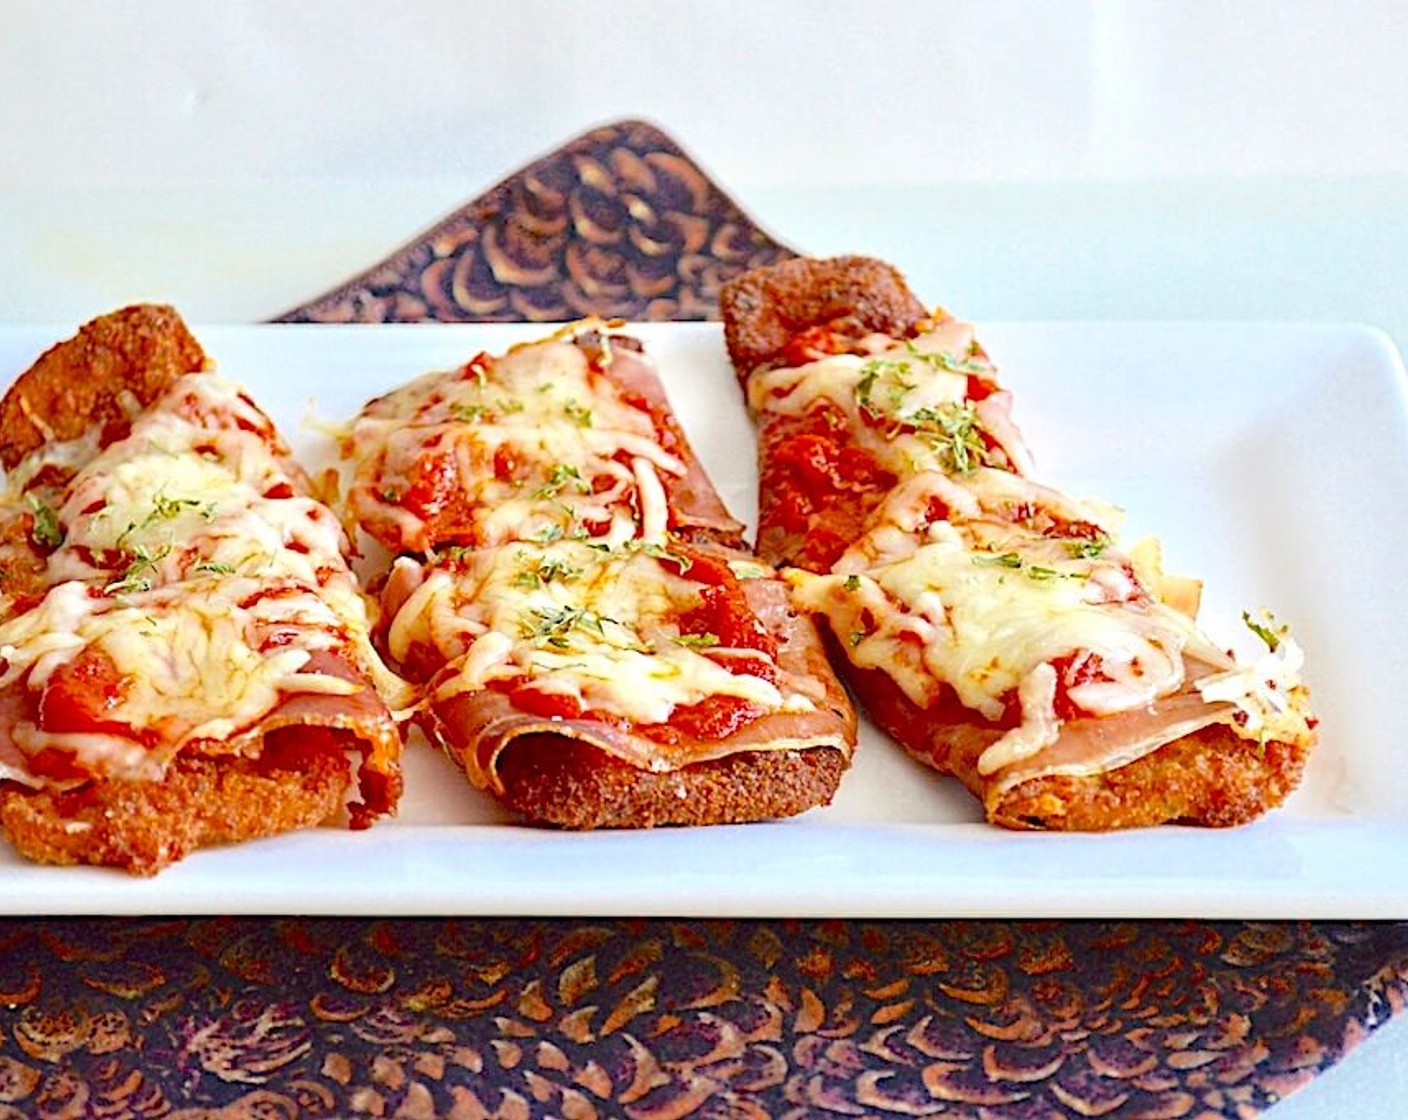 step 8 Bake it all for 10-15 minutes, until the cheese is bubbly and the prosciutto gets crispy. Serve immediately! You can serve it on crusty bread for an eggplant parmigiana sandwich or over pasta with more warmed up marinara. Enjoy!